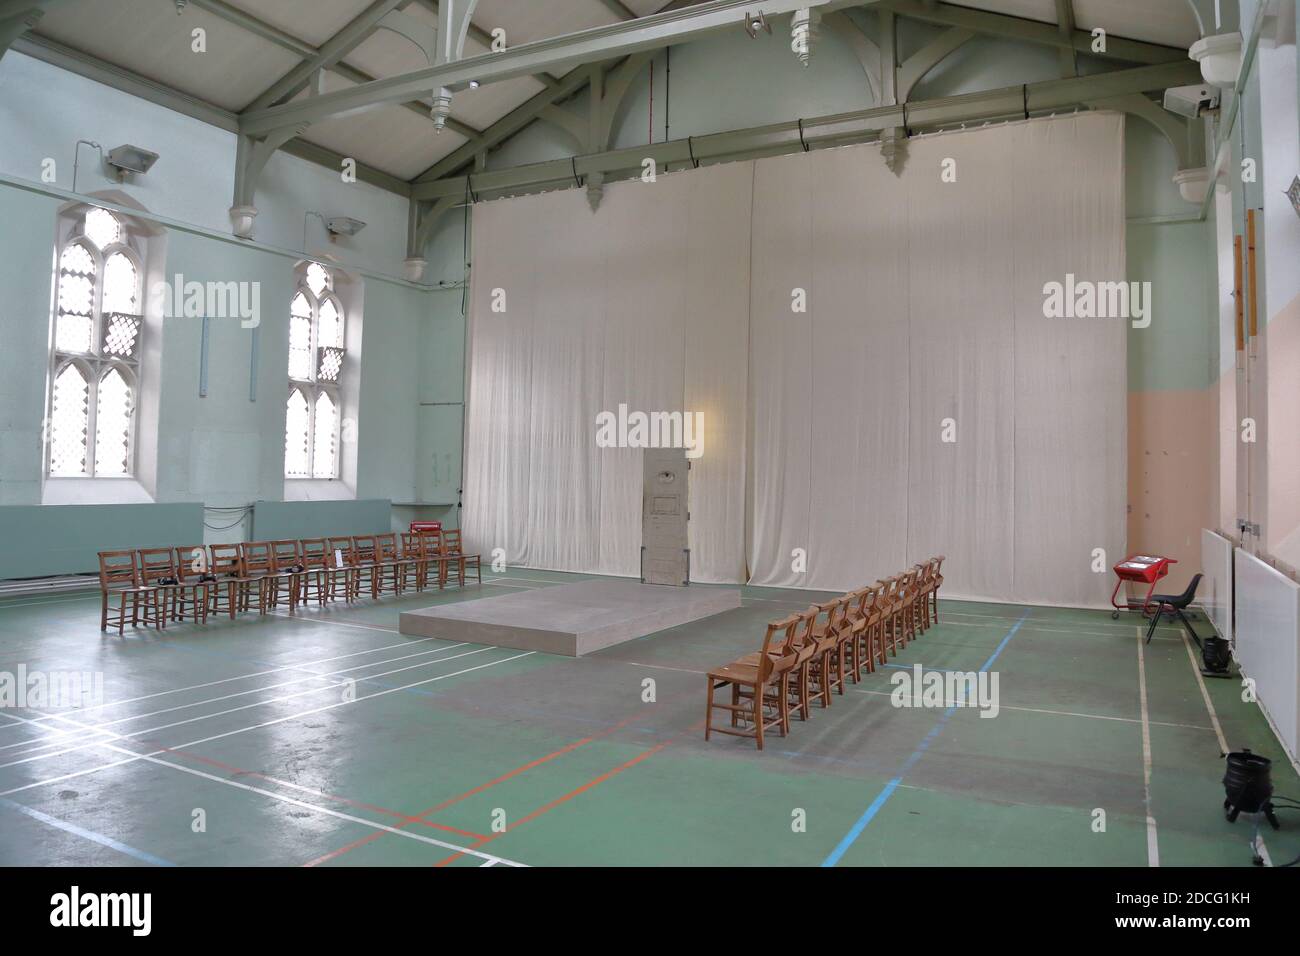 Indoor sports facility at infamous Reading Prison where Oscar Wilde was incarcerated, Reading, Berkshire, UK Stock Photo